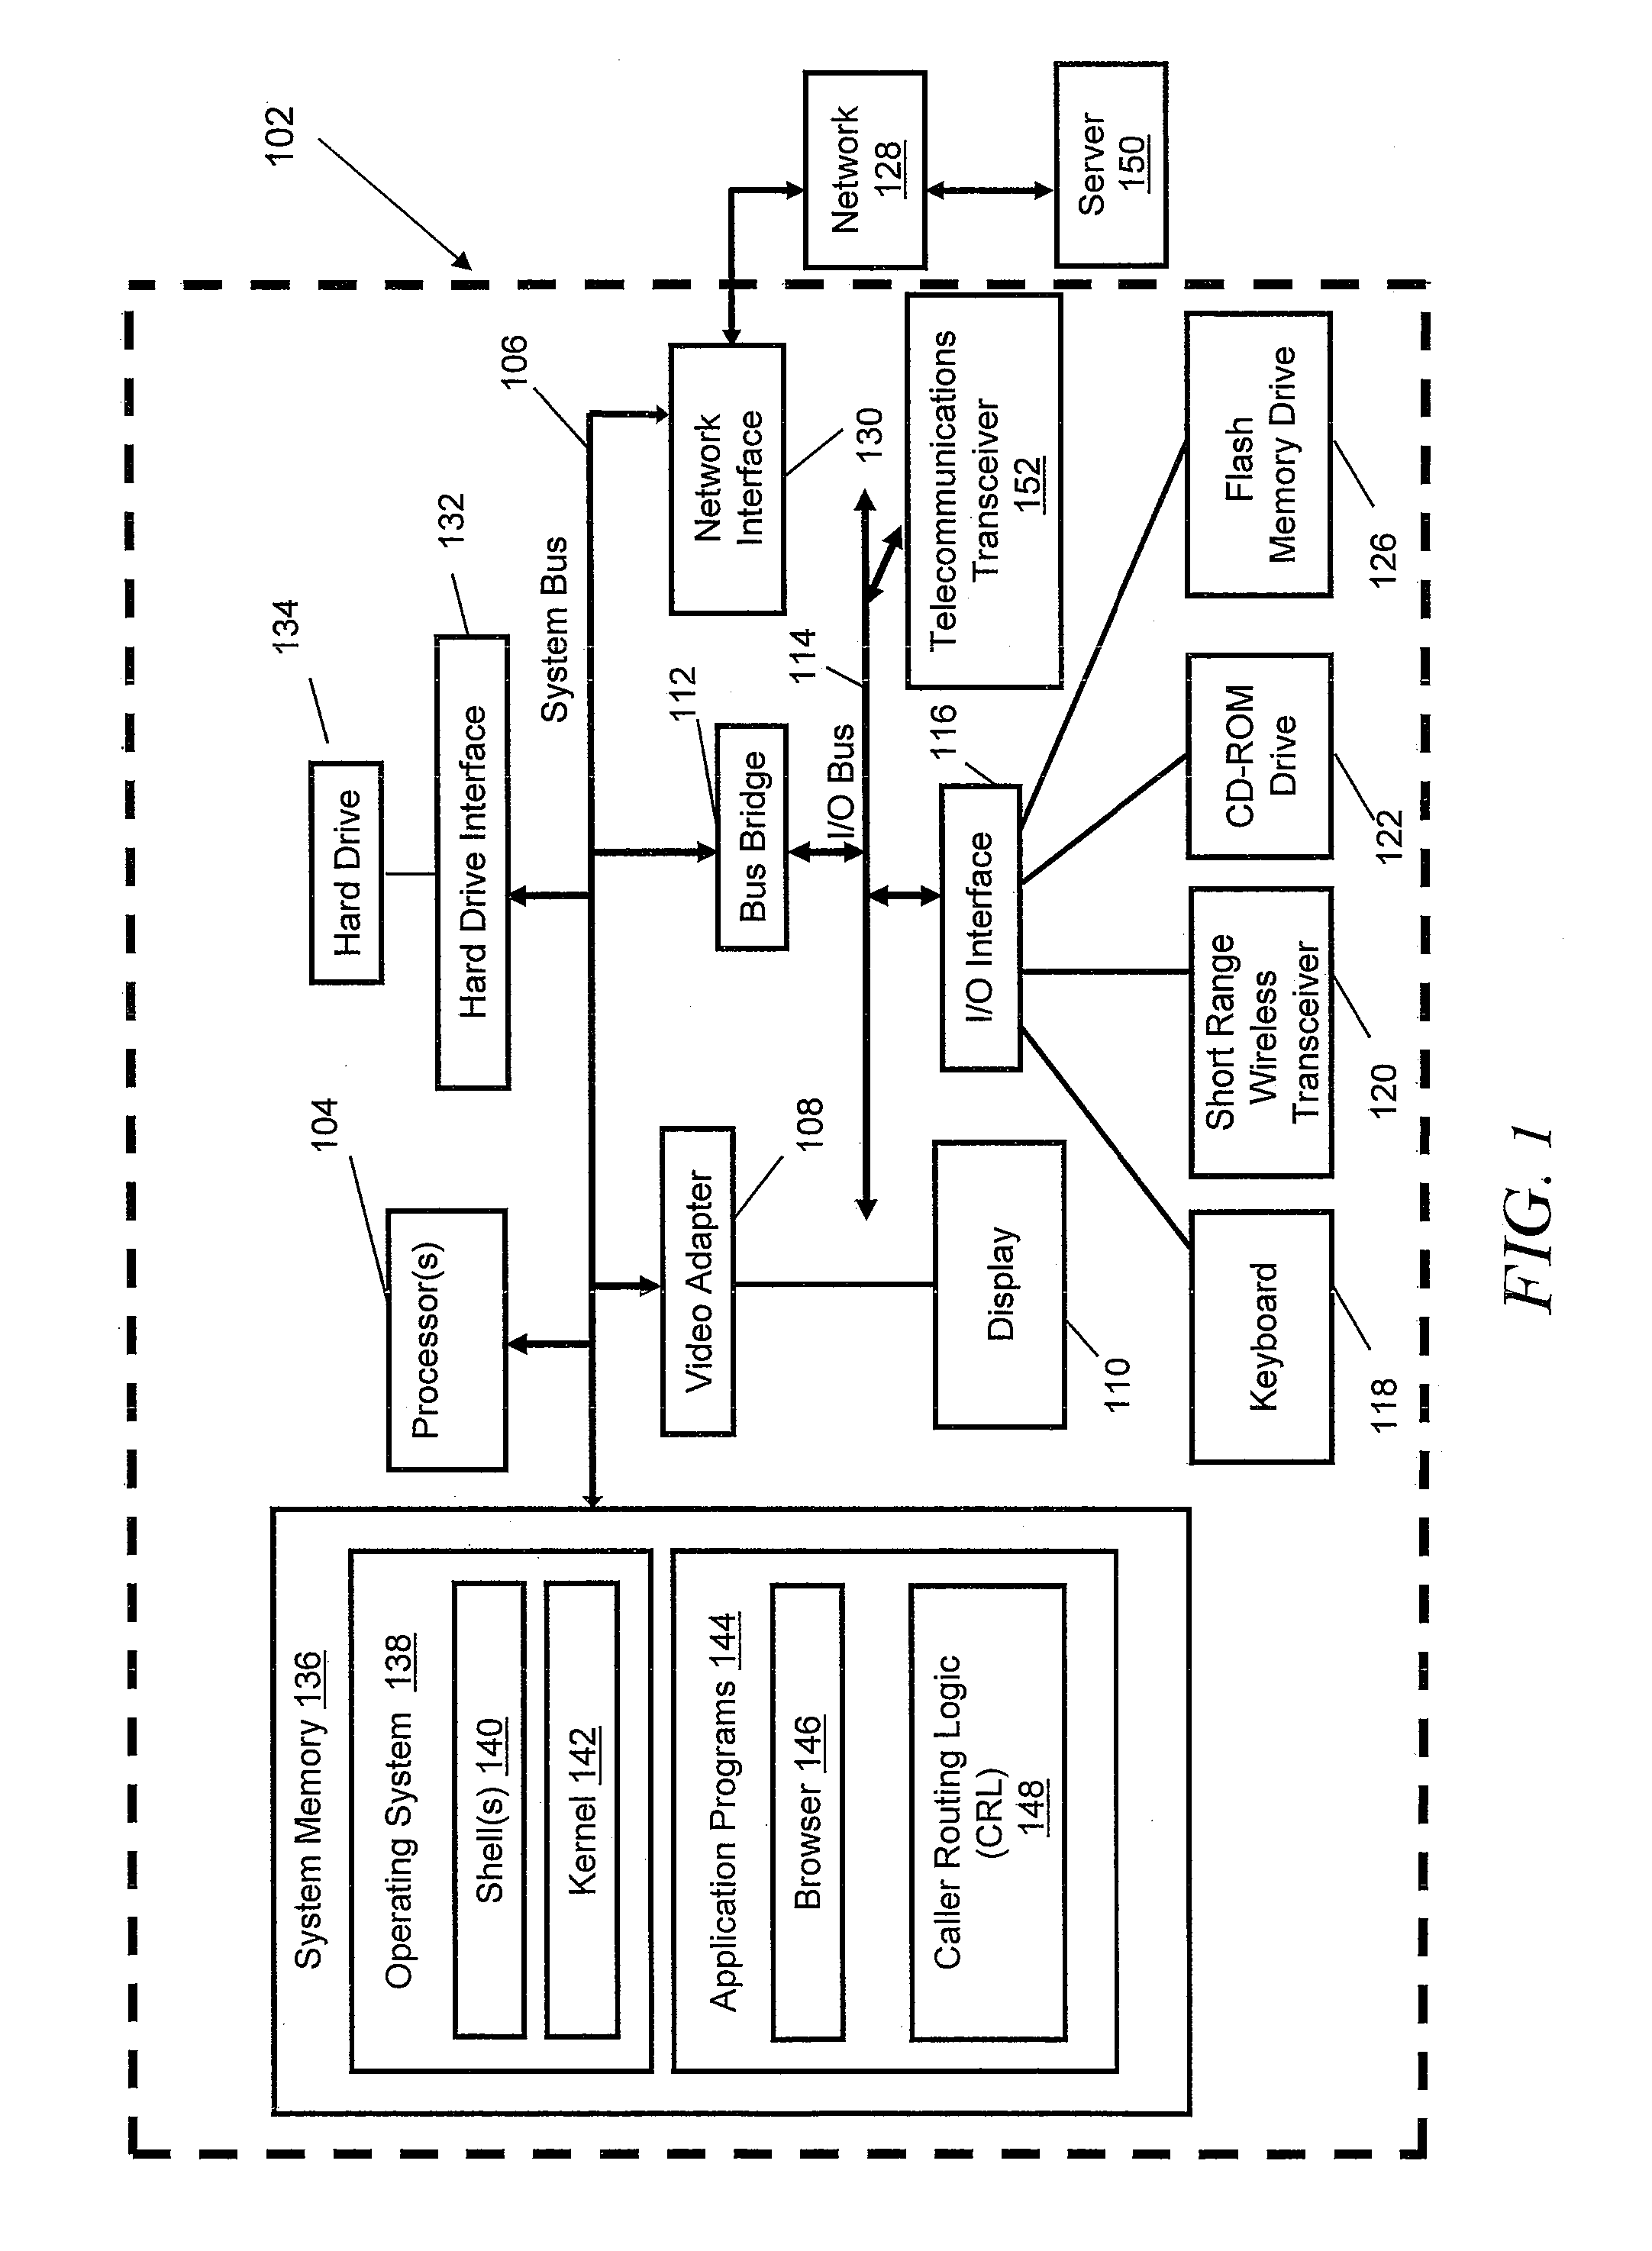 Method and system for performing caller based routing of a phone call